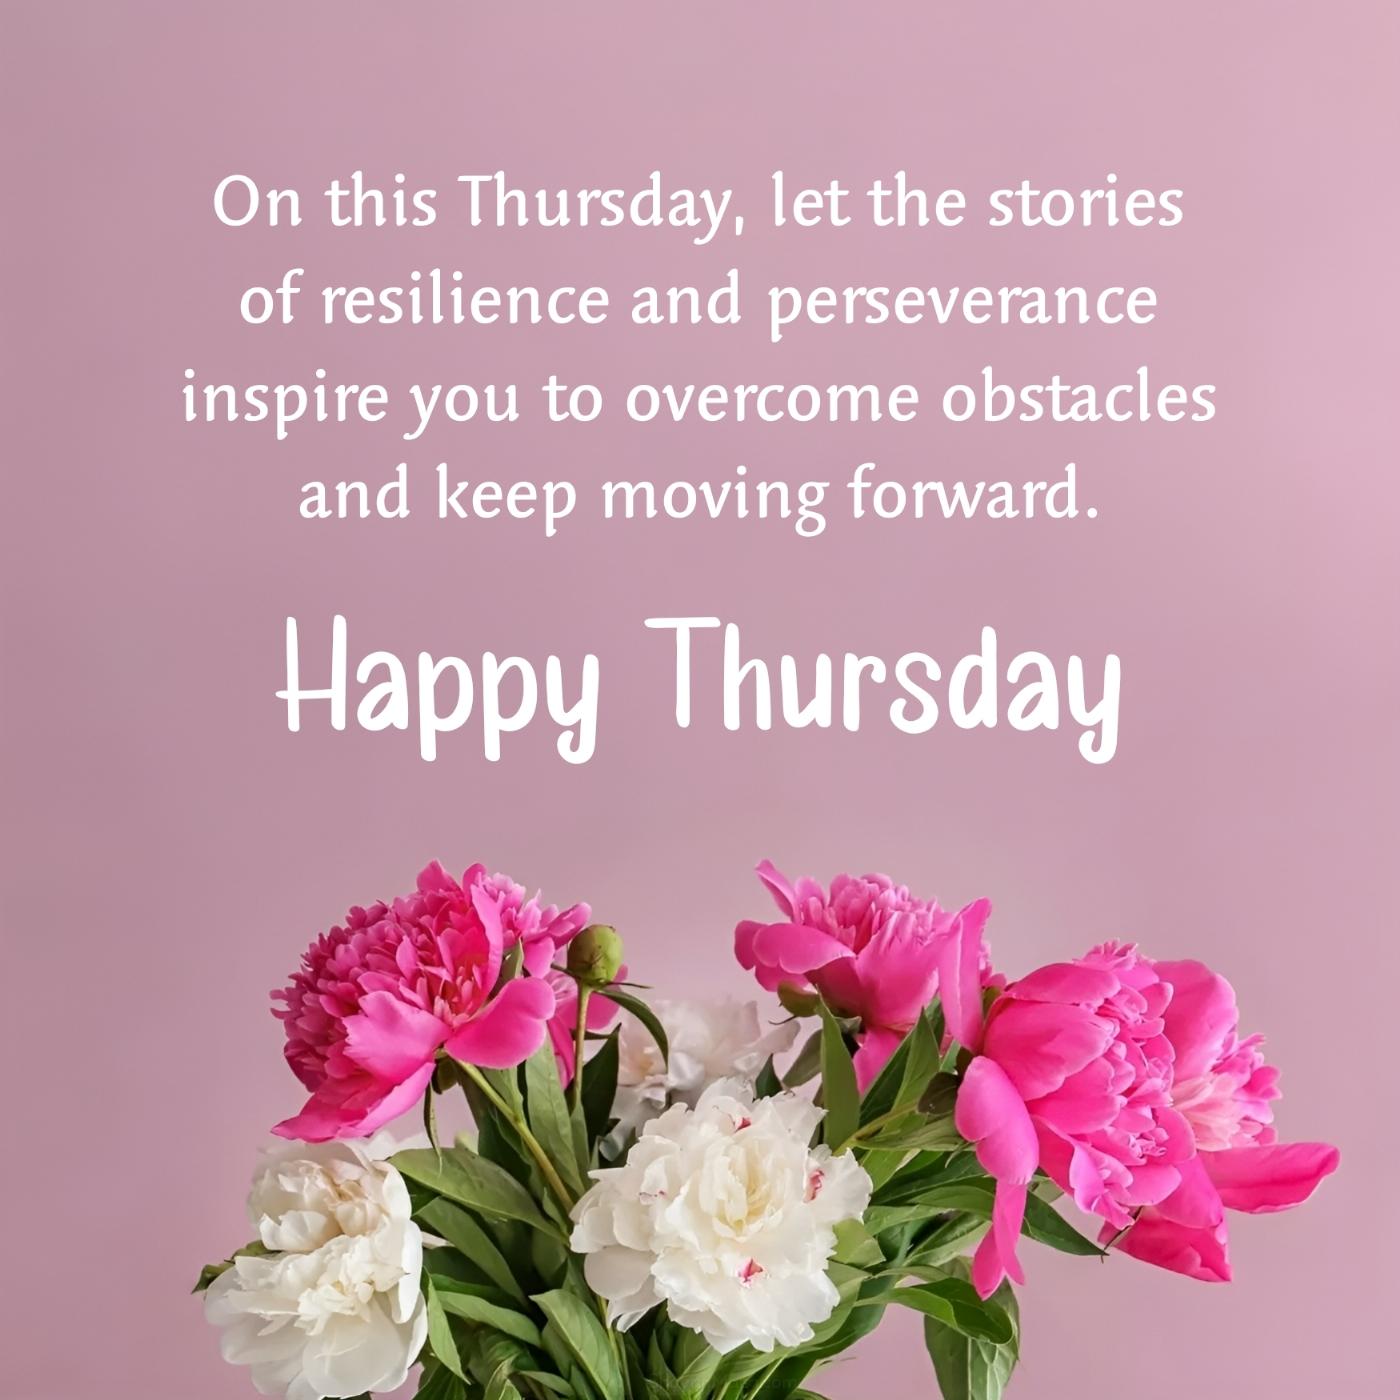 On this Thursday let the stories of resilience and perseverance inspire you